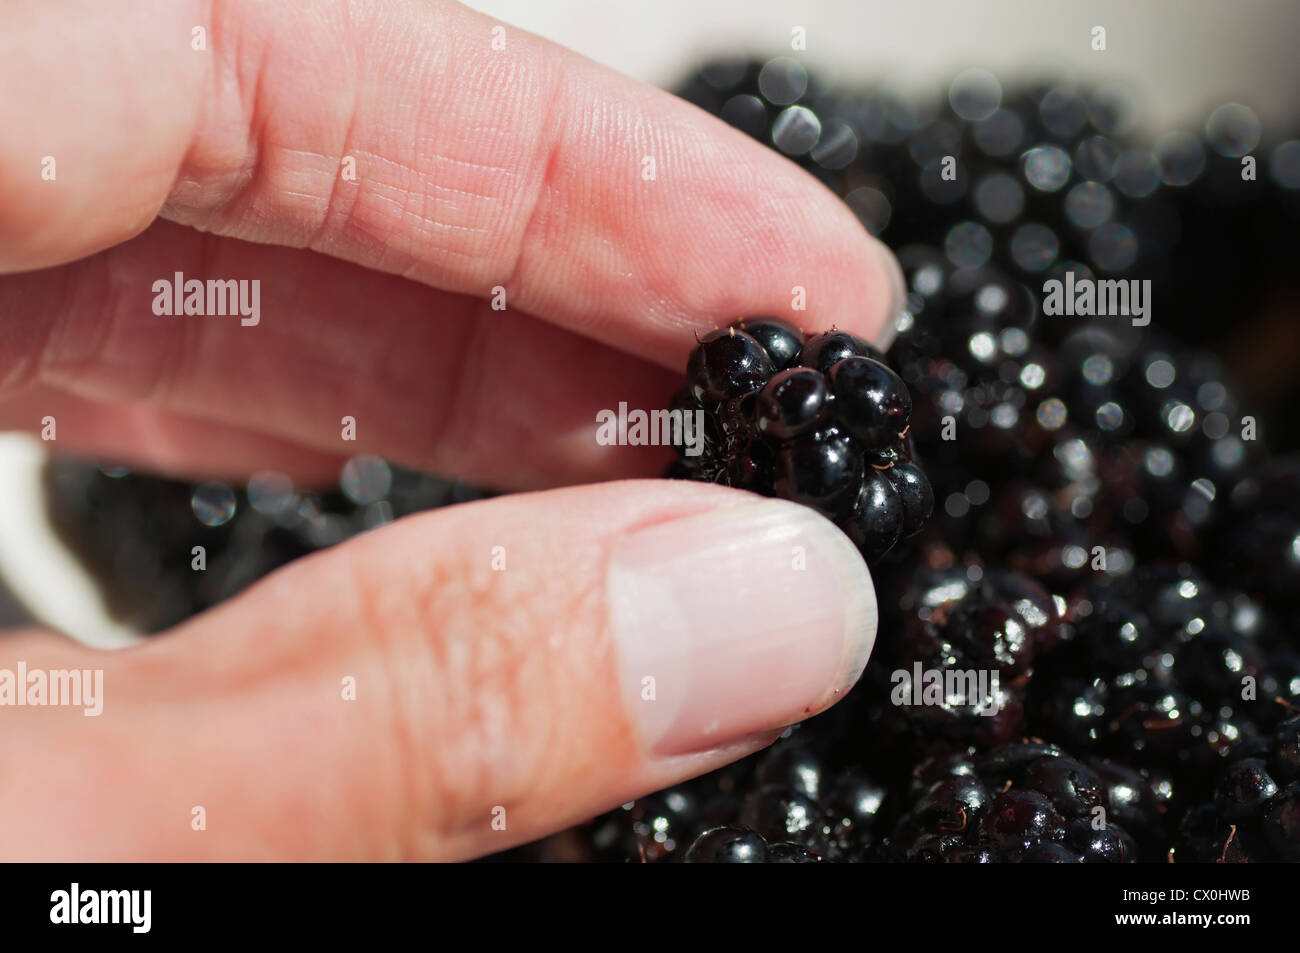 Closeup of a woman's fingers and thumb picking up a fresh blackberry from a bowl full of blackberries. Stock Photo